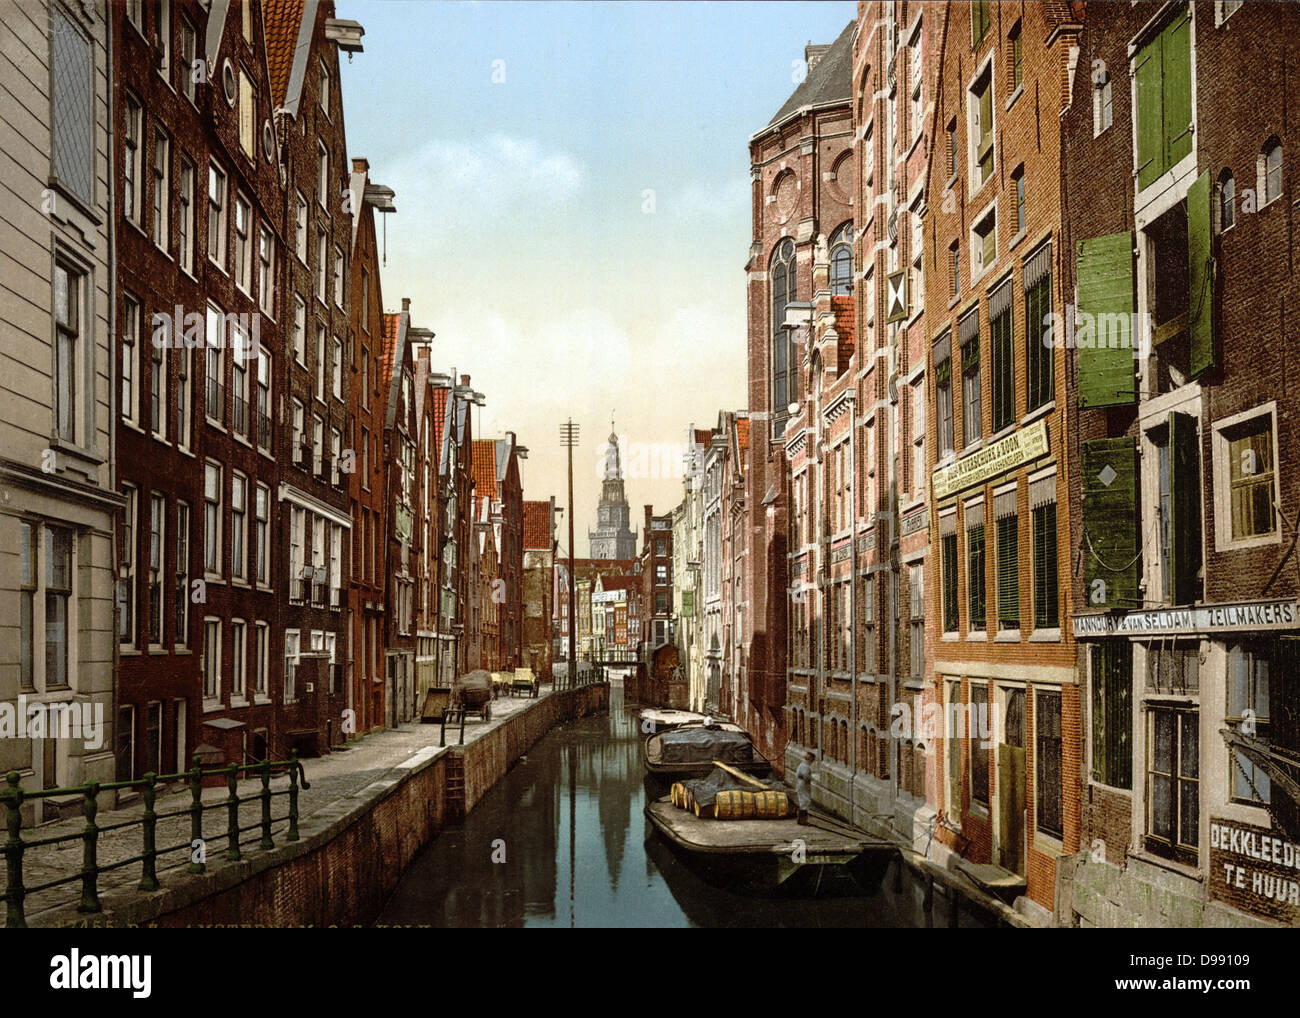 Oude Zÿds, the Kolk , Amsterdam, Holland, 1890-1900. View of canal in the old Jewish quarter, with flat-bottomed punts or barges on the water and hand carts on the pavement. Netherlands Transport Architecture Stock Photo